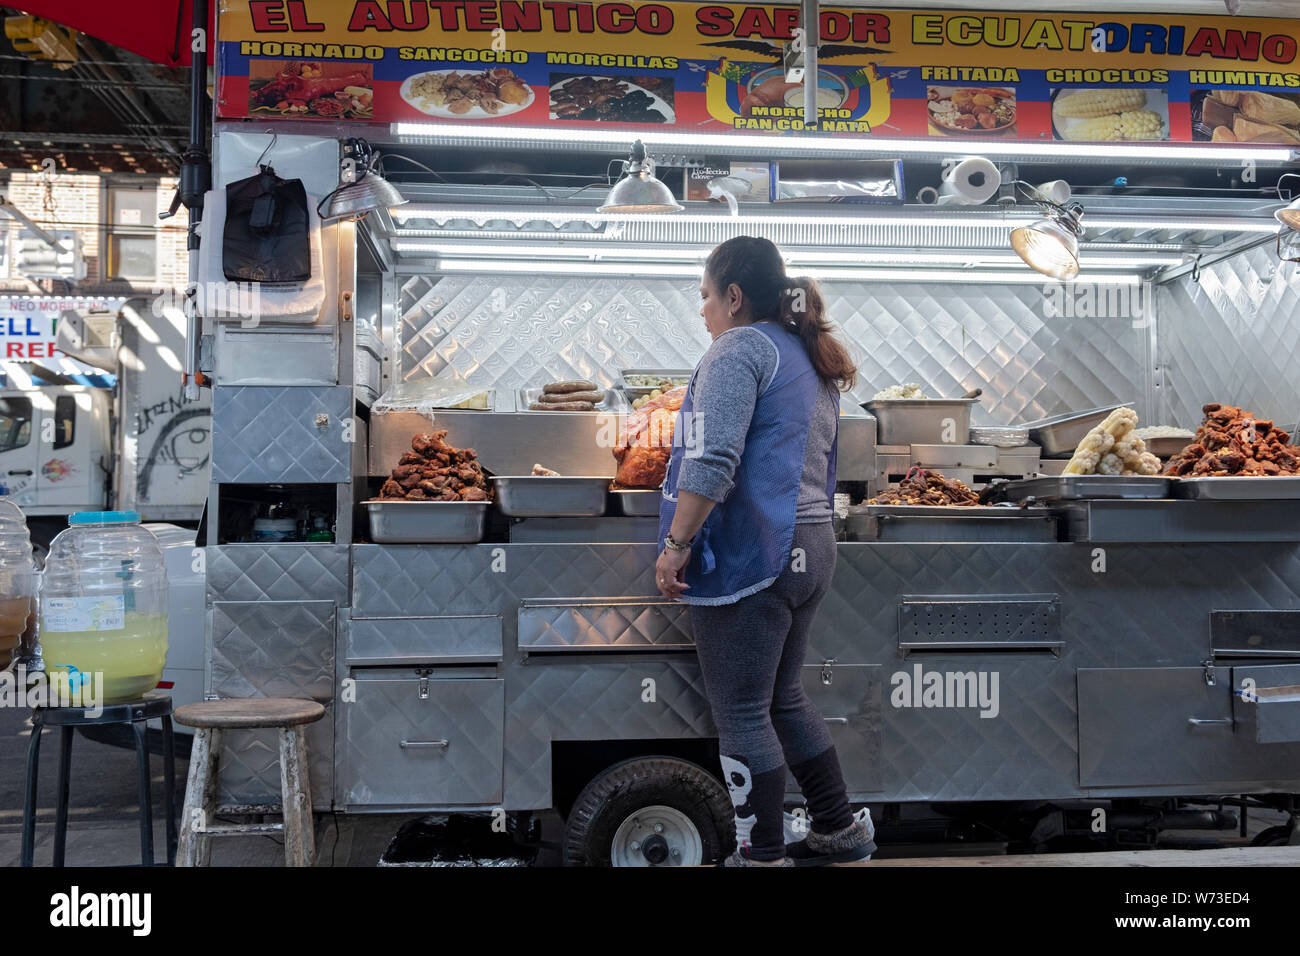 A Hispanic woman selling Ecuadorian food from a cart under the elevated subway on Roosevelt Avenue on Corona, Queens, New York City. Stock Photo